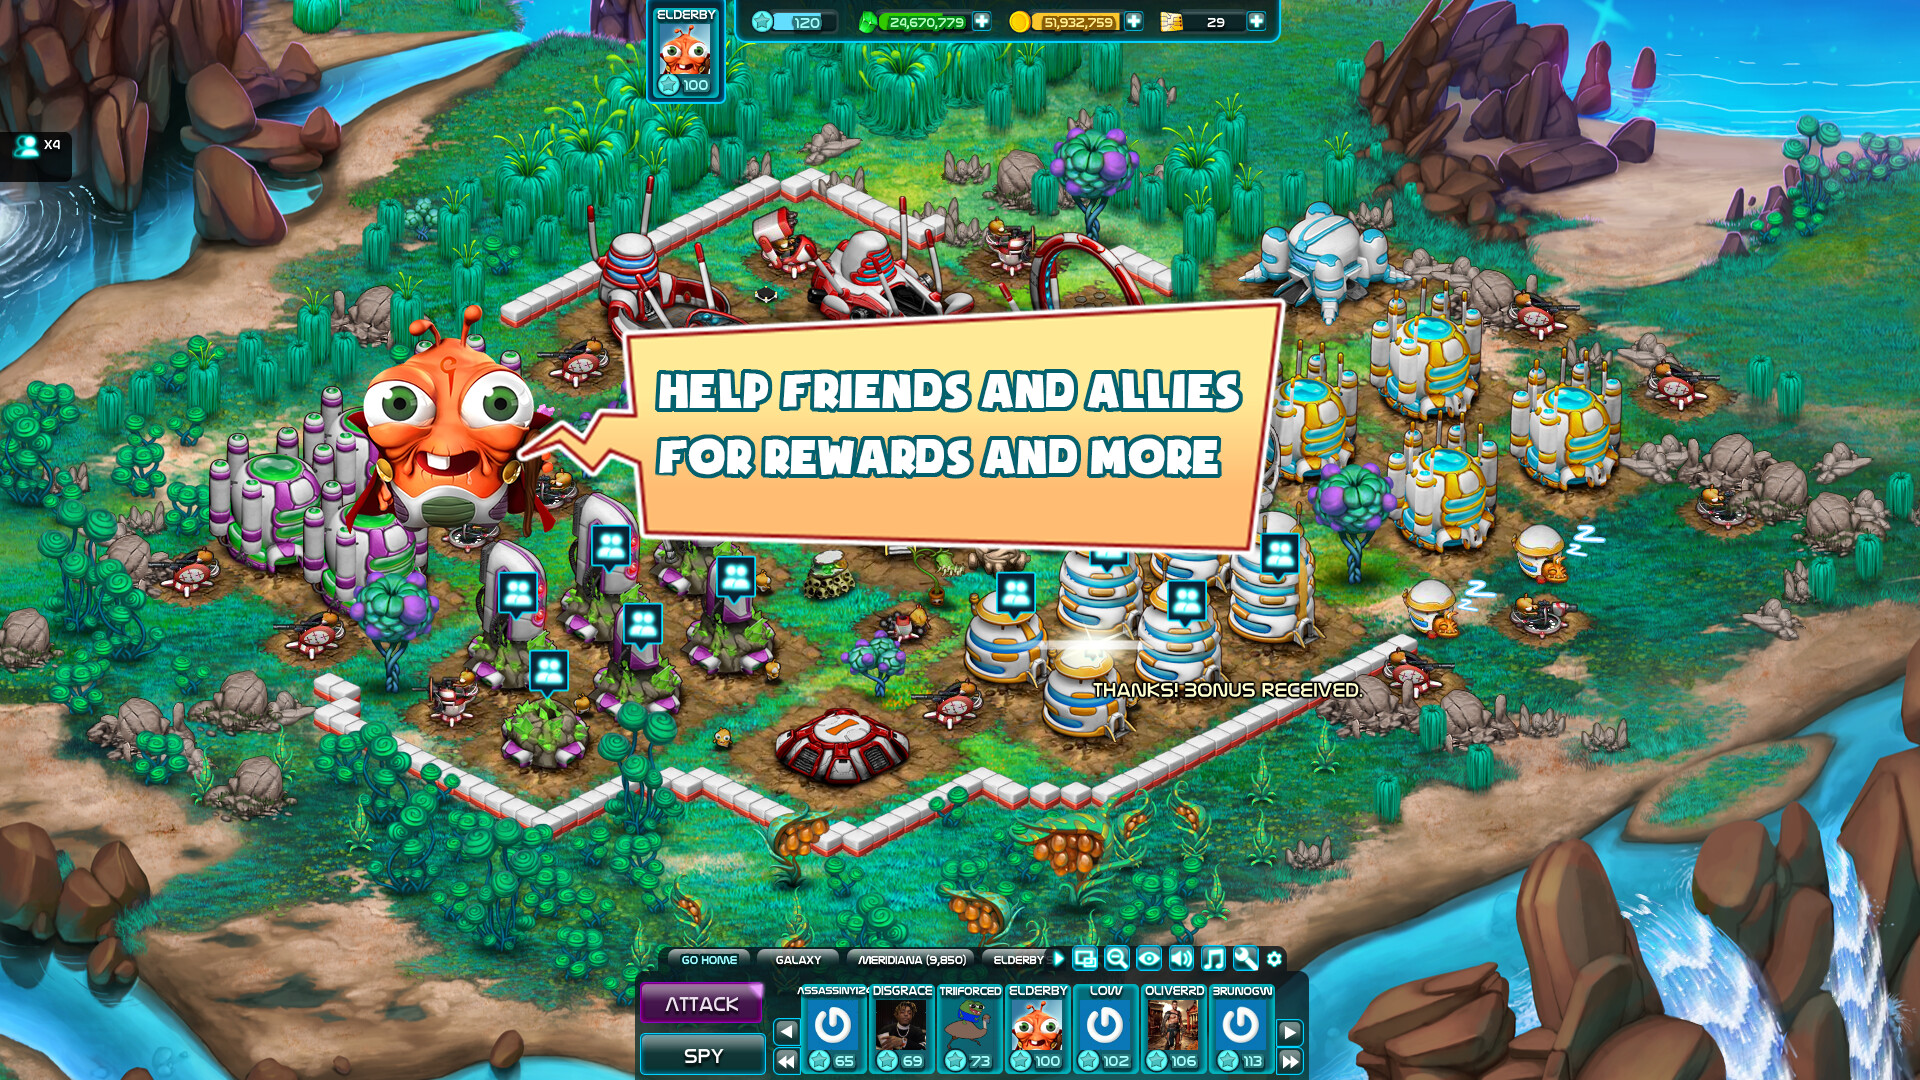 GALAXY LIFE free online game on